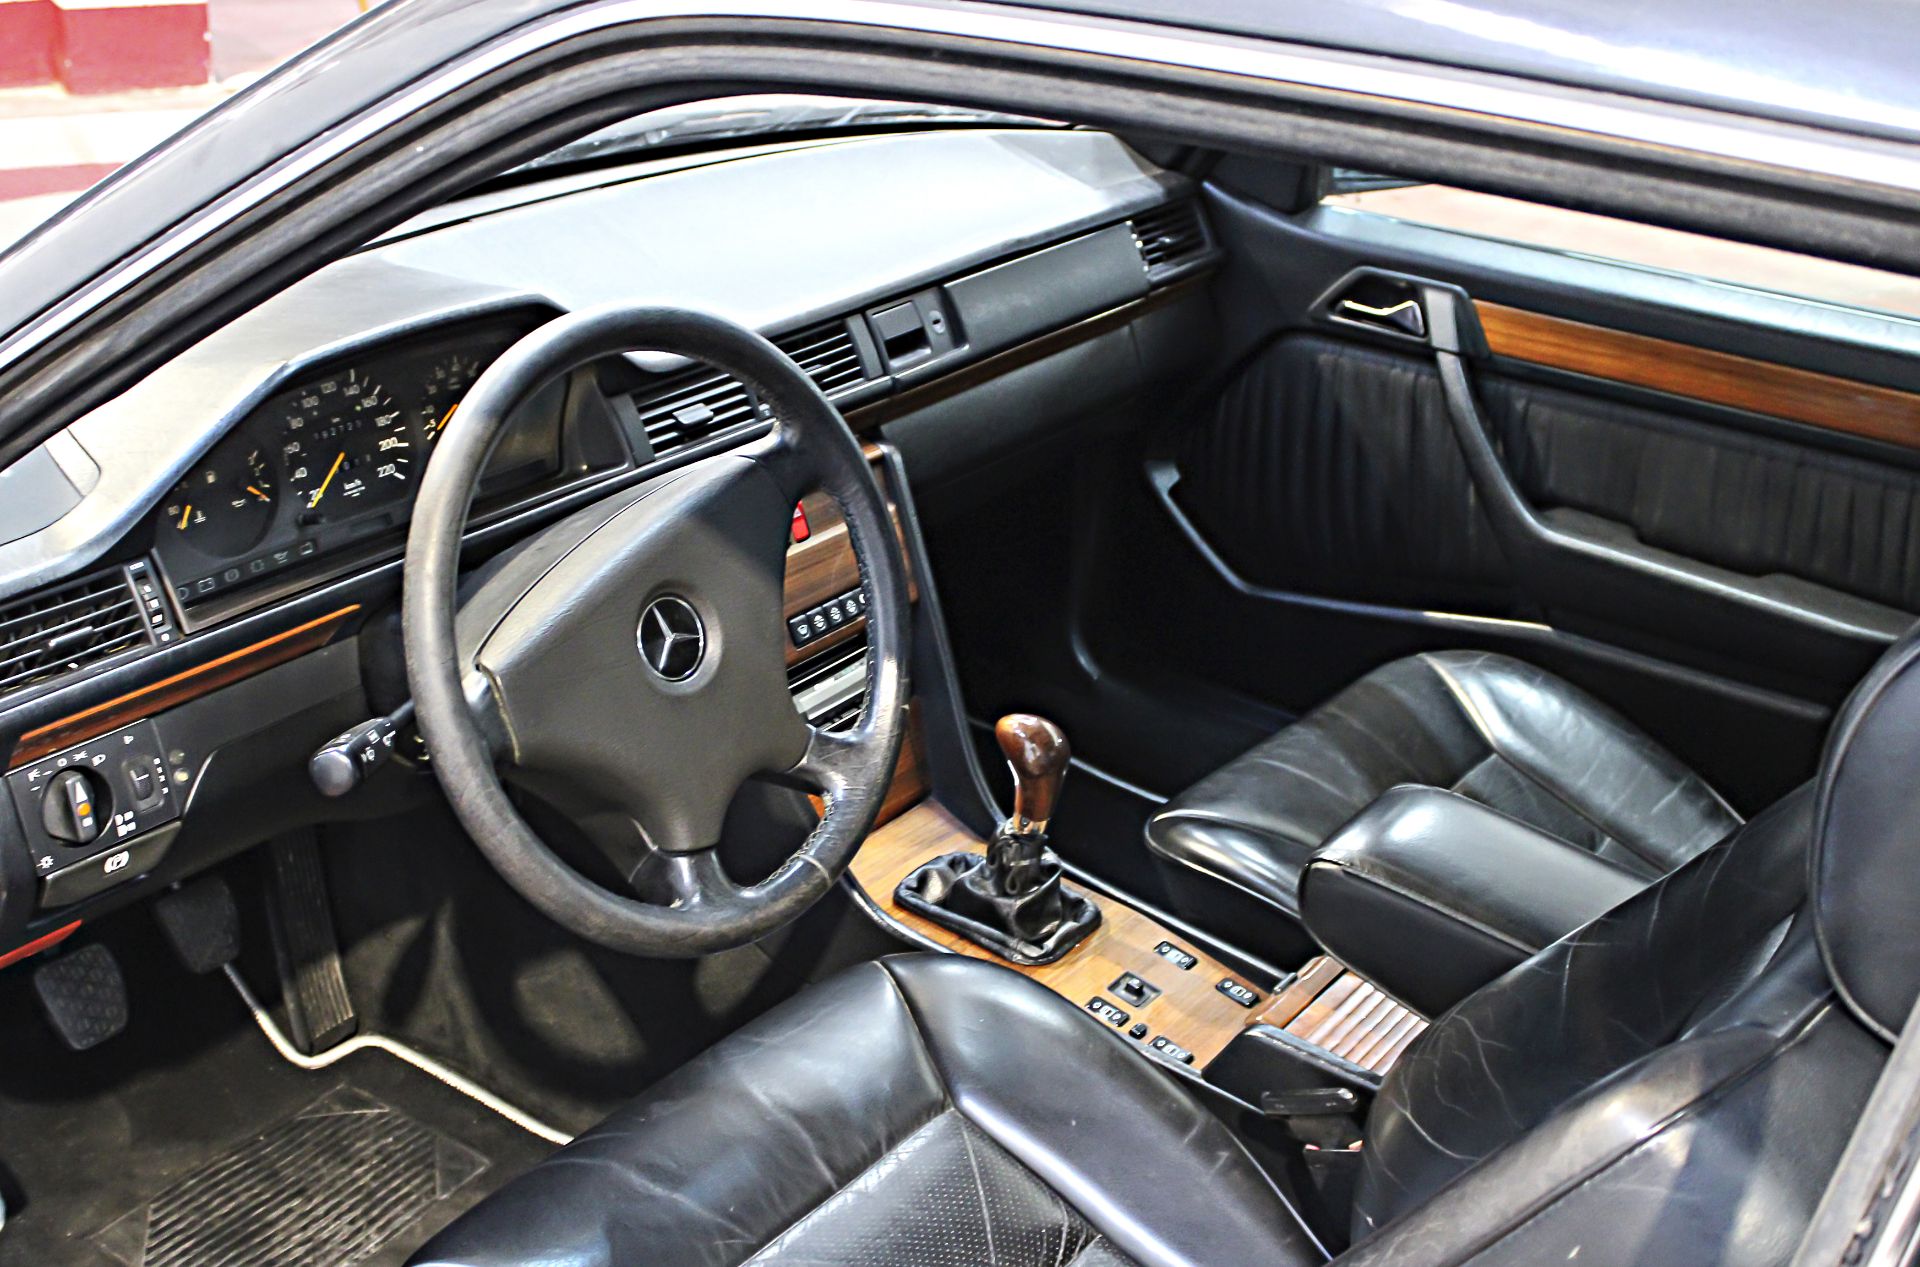 MERCEDES 230 CE 1992 - Image 3 of 3